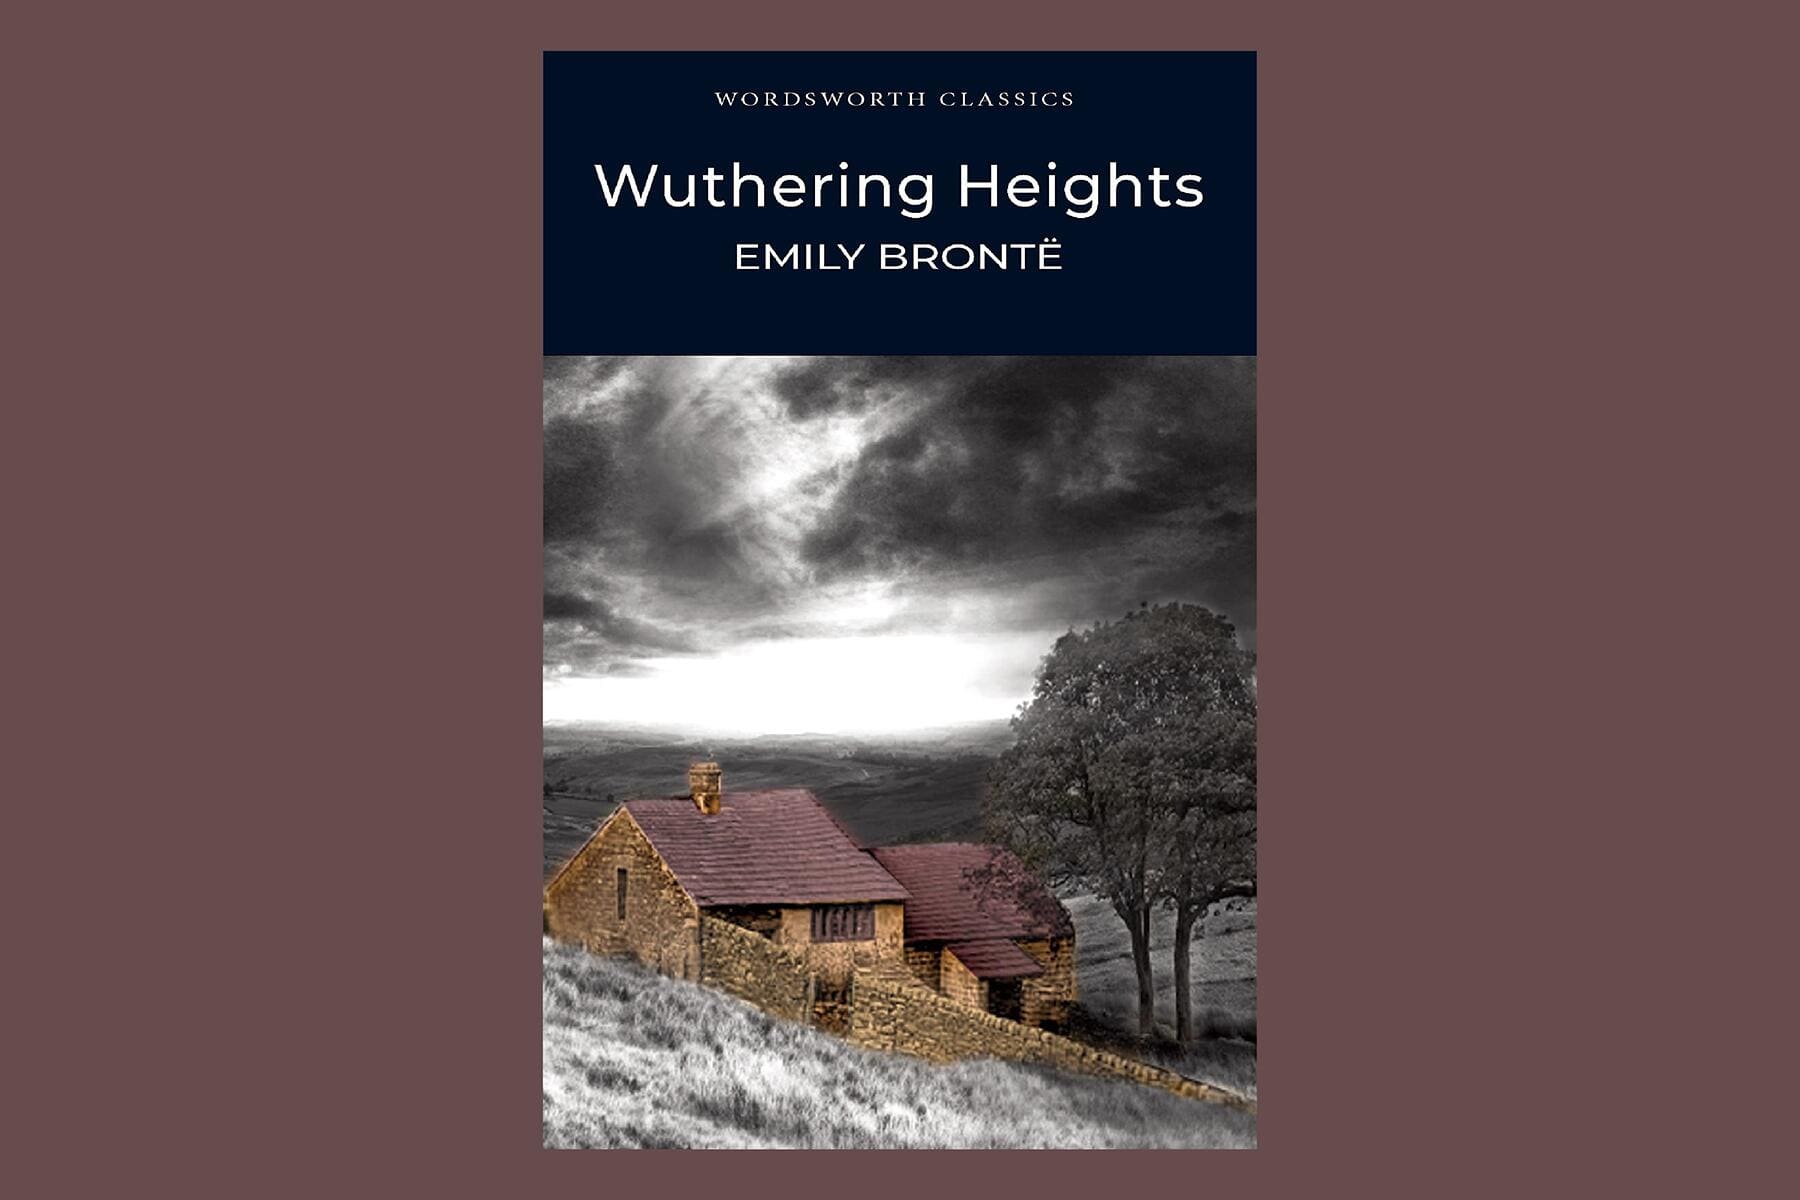 <a href='https://www.fodors.com/world/europe/england/experiences/news/photos/what-tea-to-drink-with-british-classic-literature#'>From &quot;Teas to Pair With Your Favorite British Classics: 'Wuthering Heights' by Emily Brontë&quot;</a>